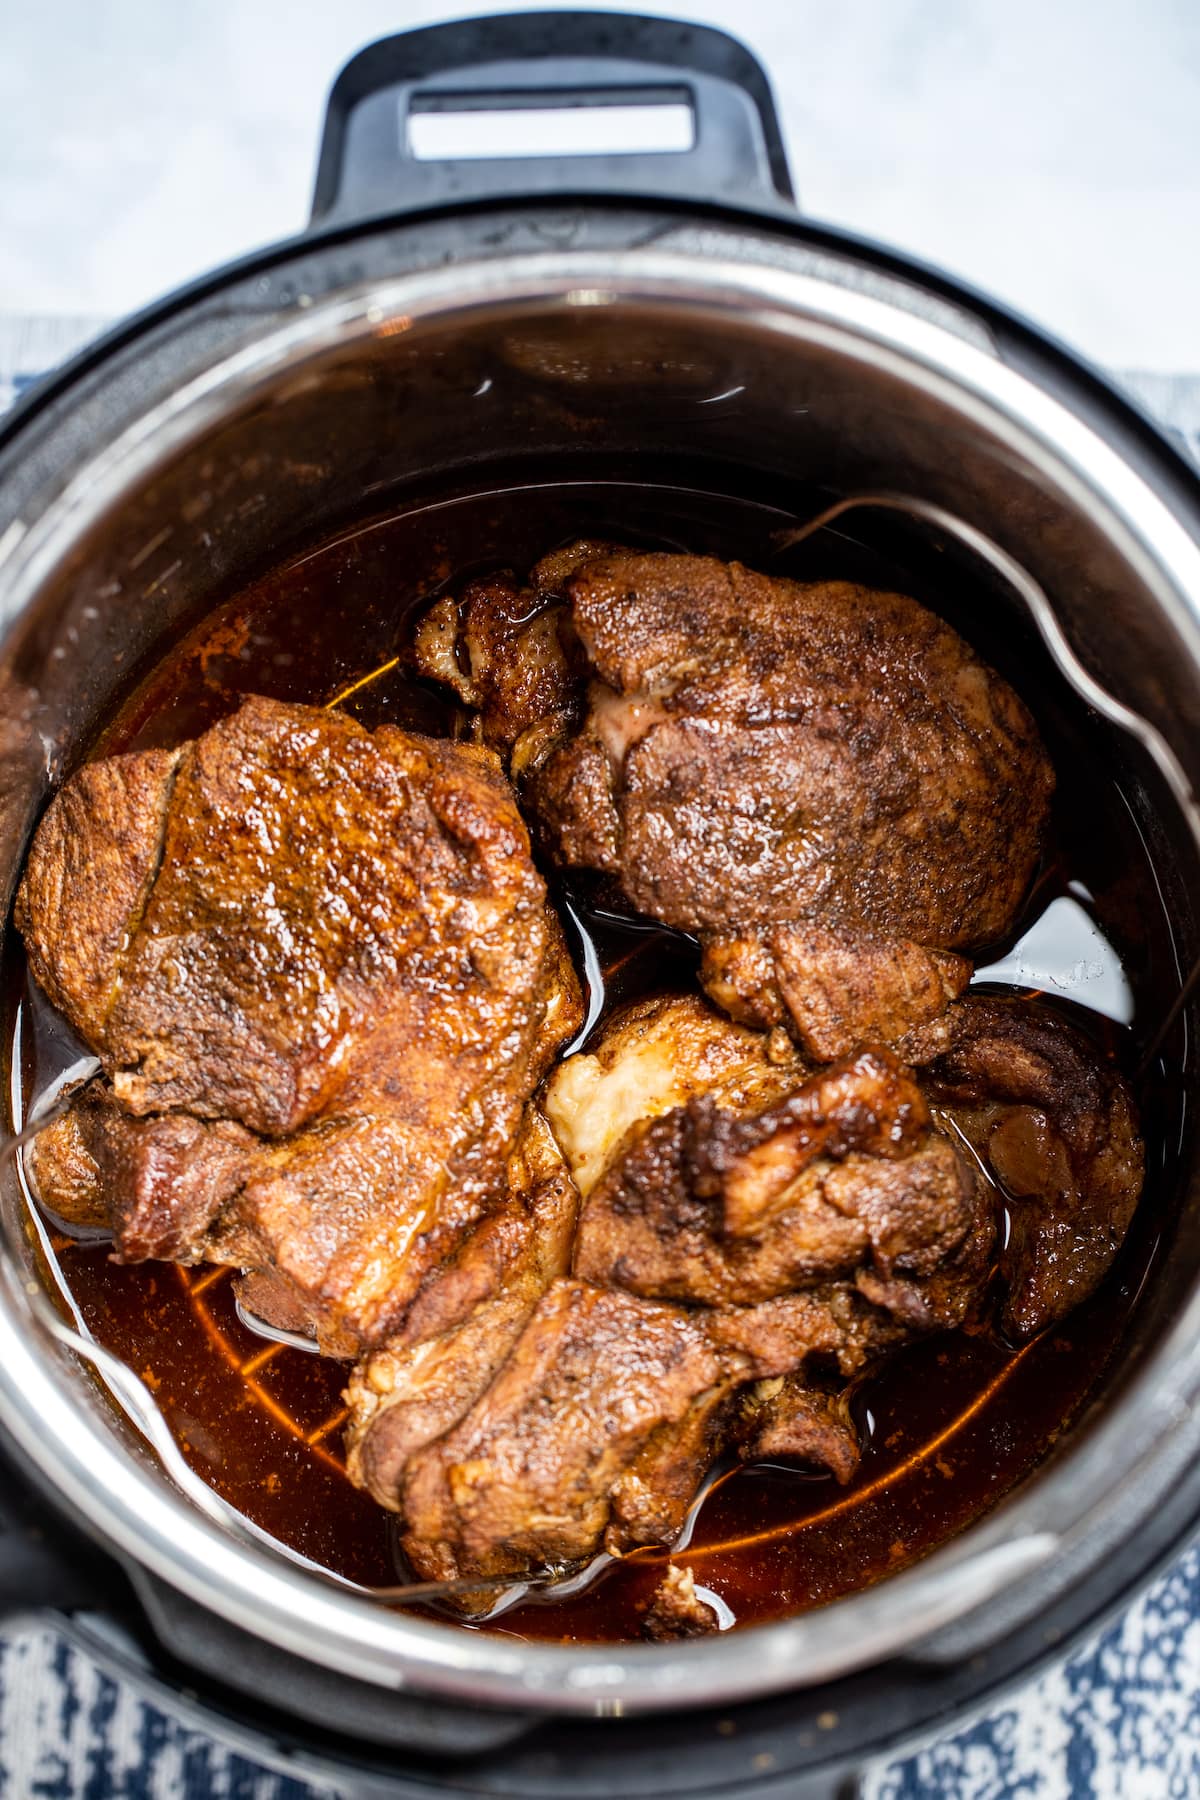 An instant pot with cooked pork shoulder on a trivet with drippings below.